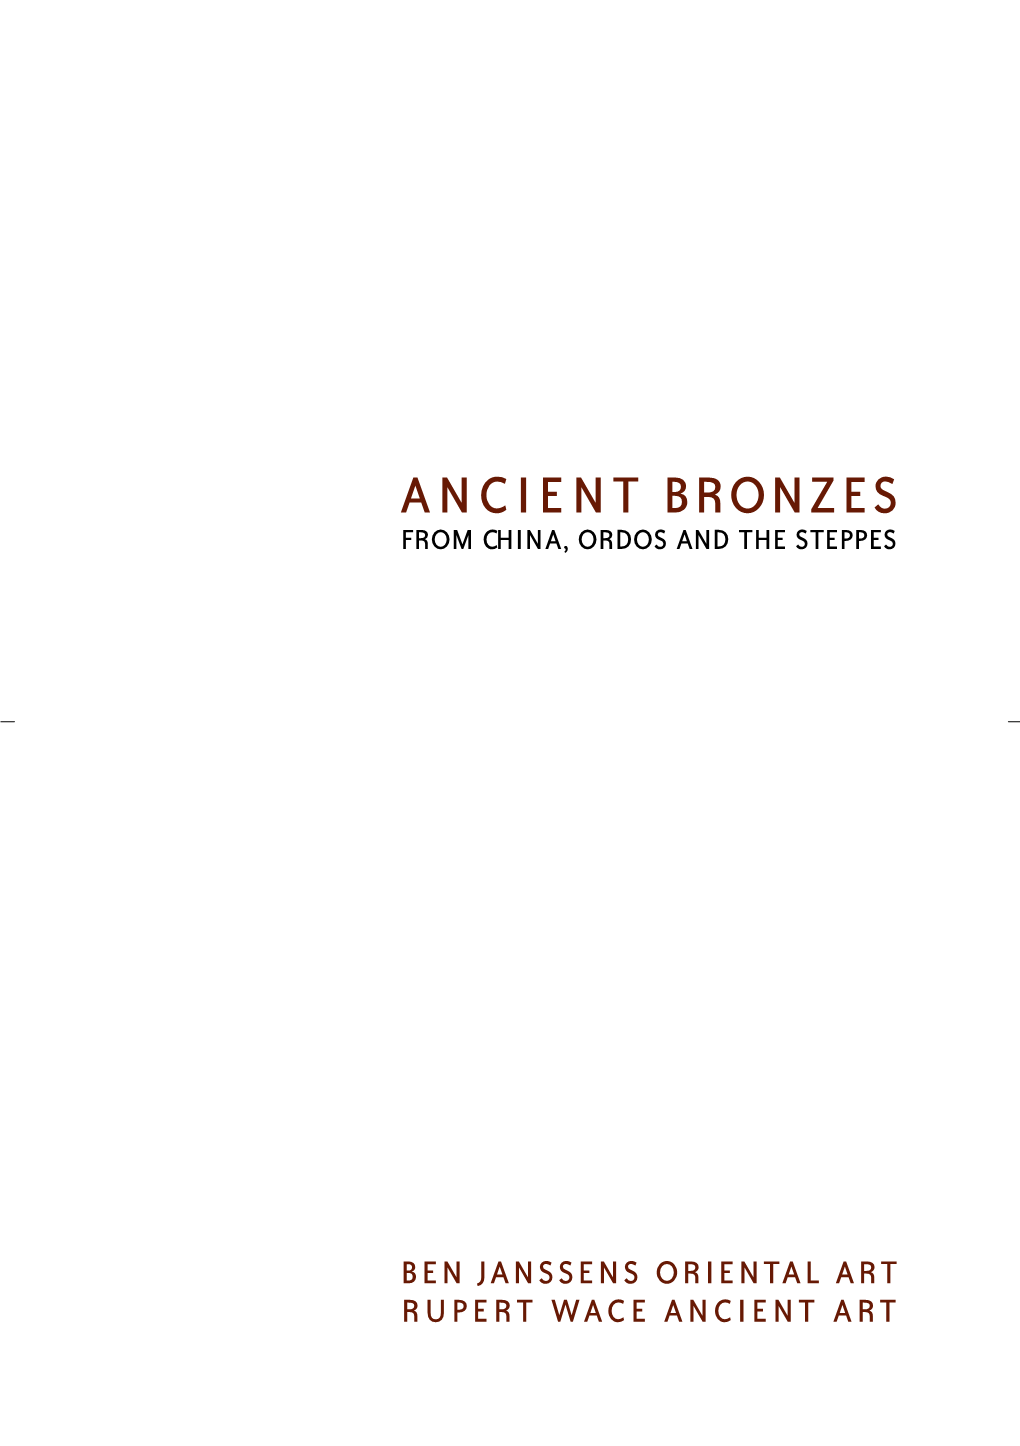 Ancient Bronzes from China, Ordos and the Steppes